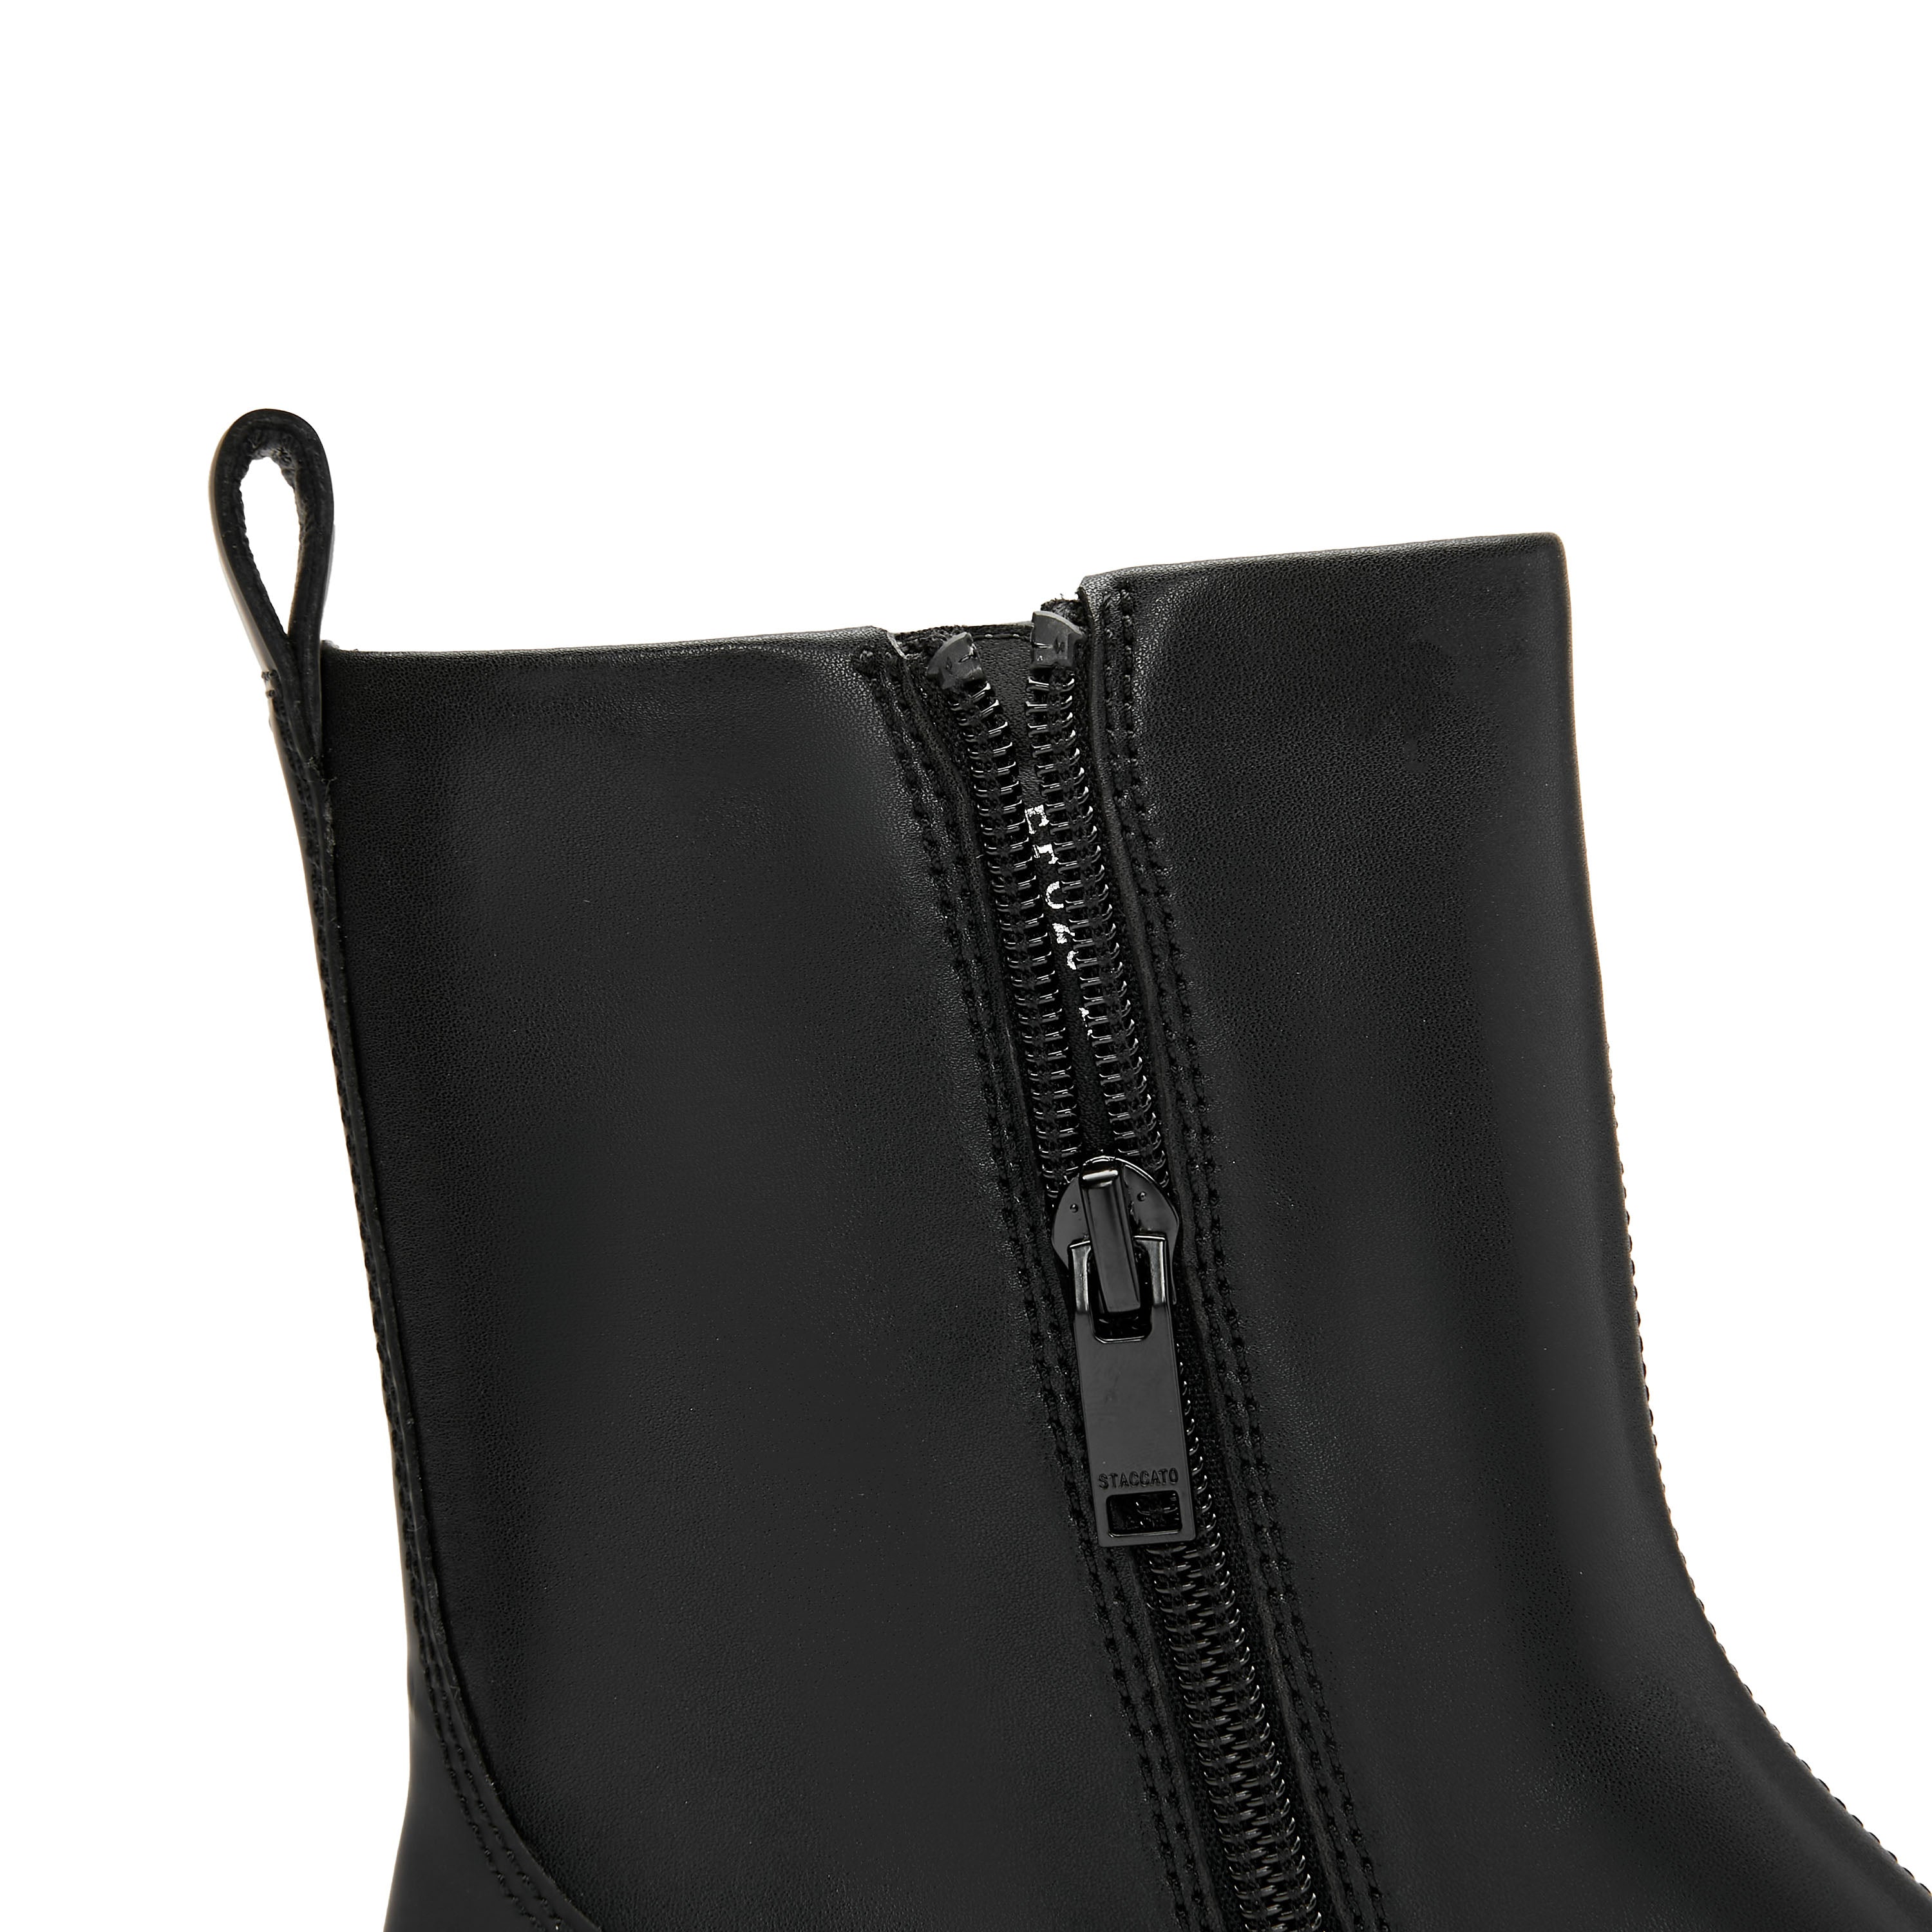 Black Softy ST Chunky Ankle Boots